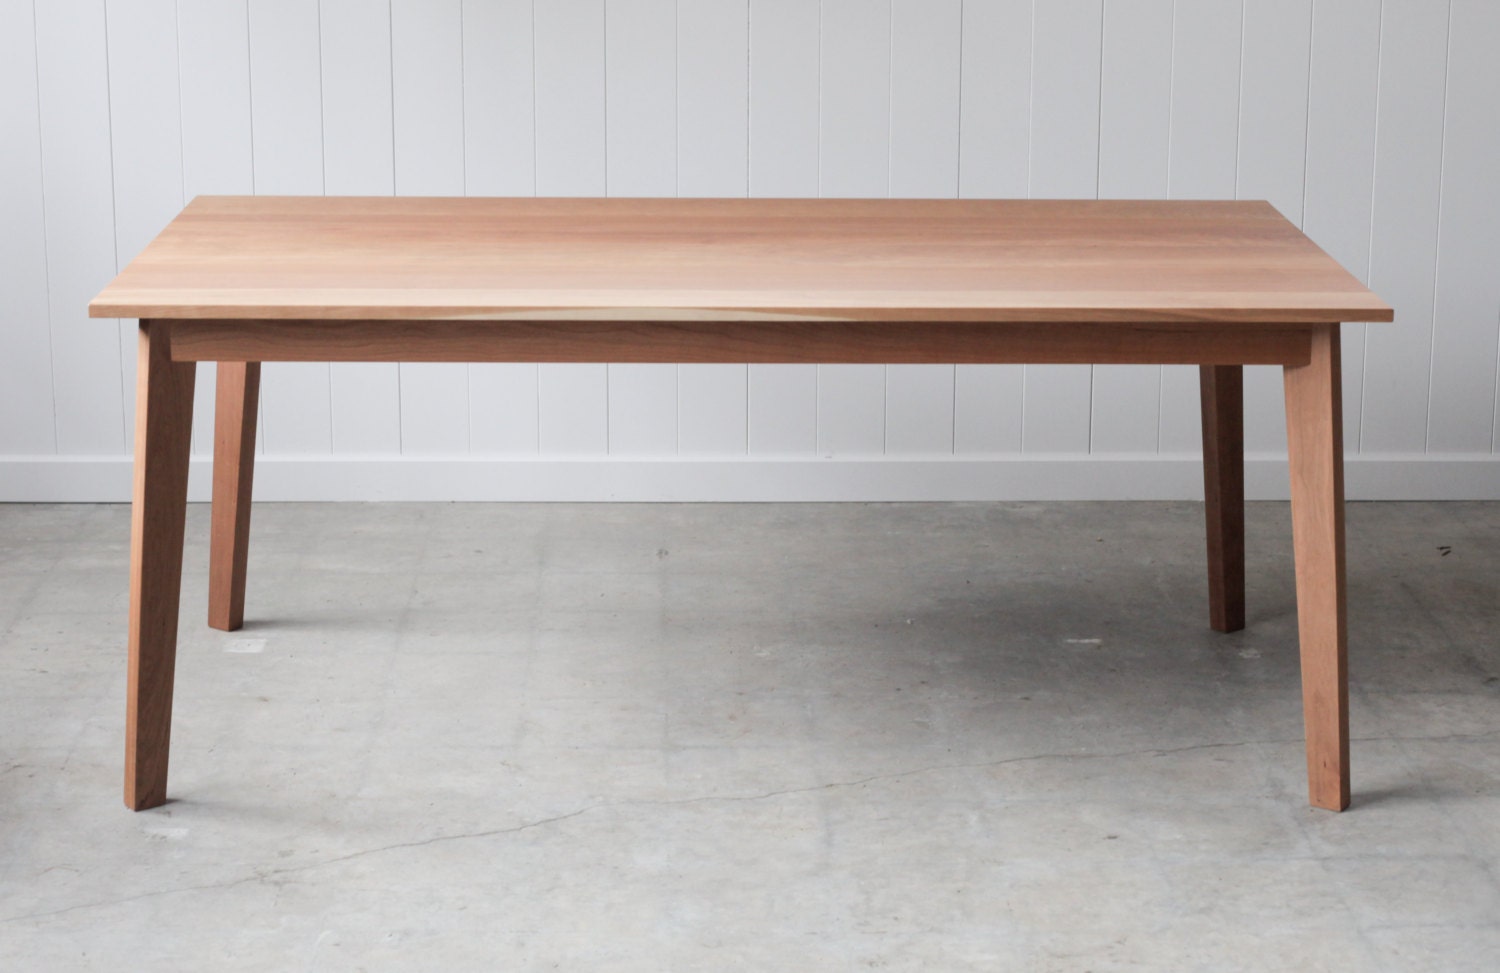 Special Offer - in stock - Ventura Dinig Table - Solid Cherry - hedgehouse